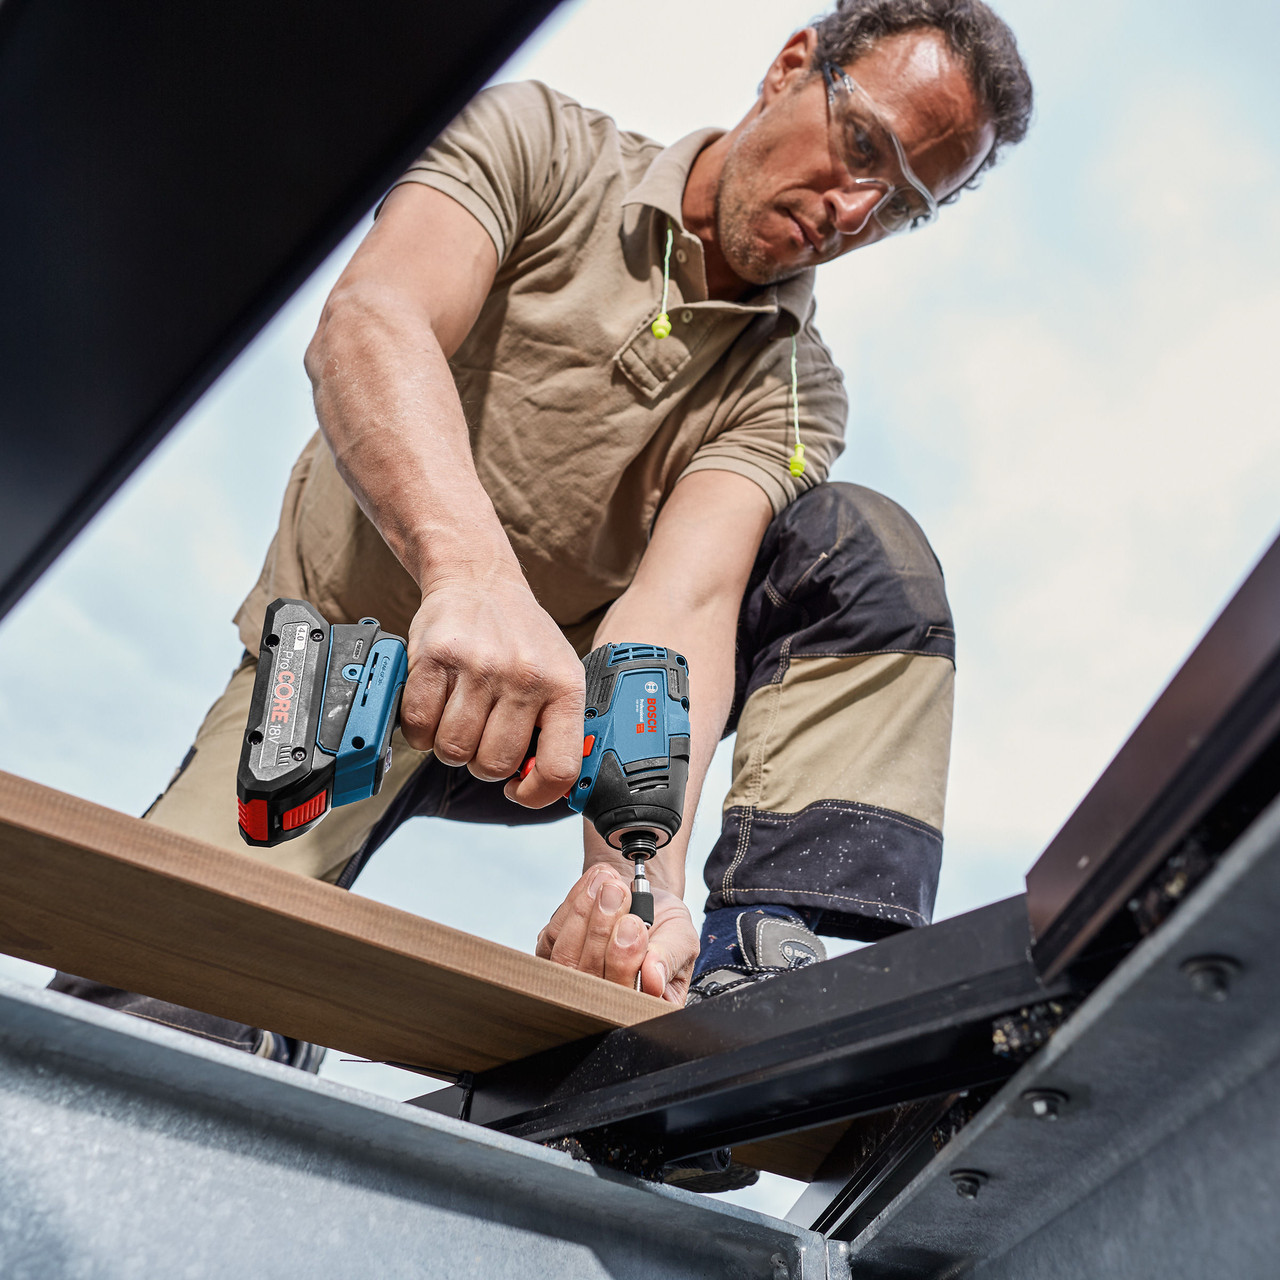 Product Test: Bosch GDR 18V-200 C Professional Impact Driver and ProCORE  batteries - Professional Electrician